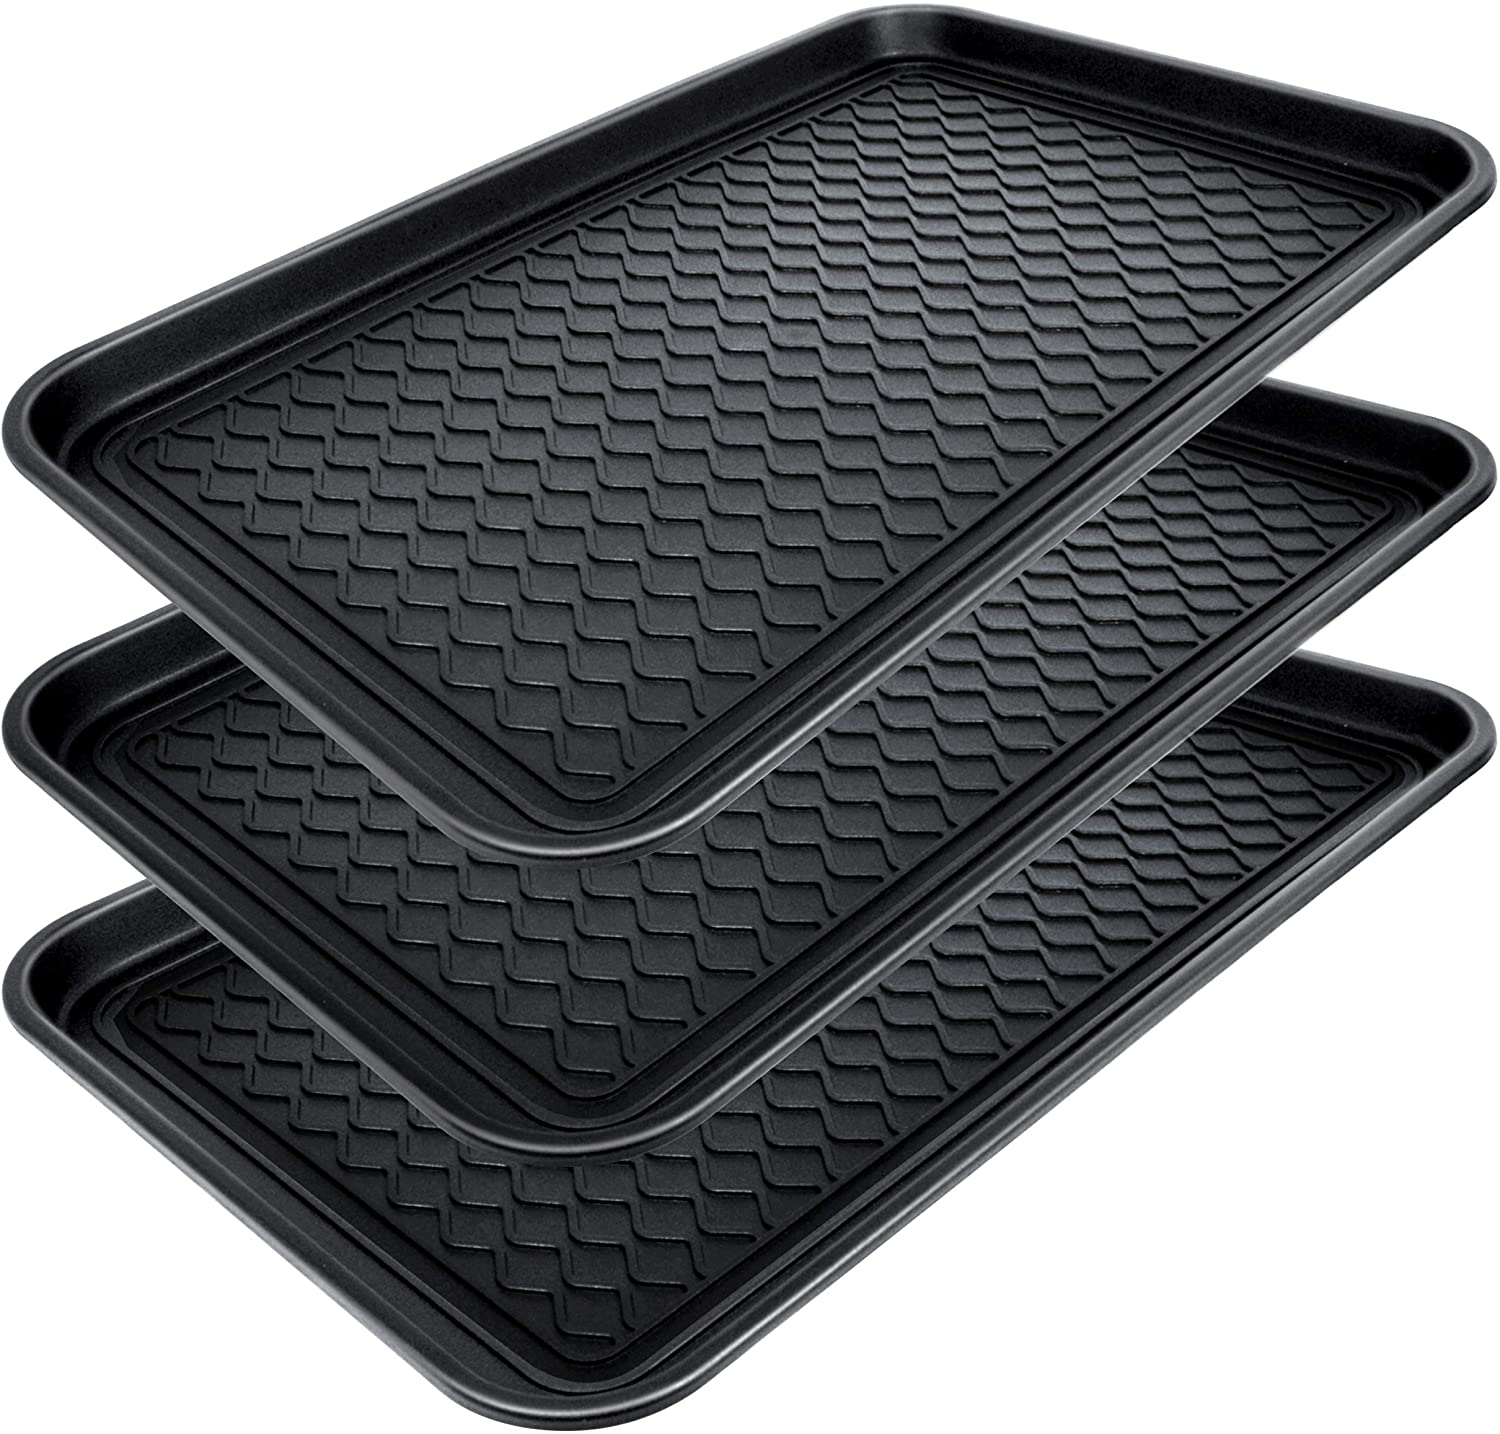 2 Pack Utility Boot Catch All Tray Dirt Muddy Shoes Plastic Drip Mats 